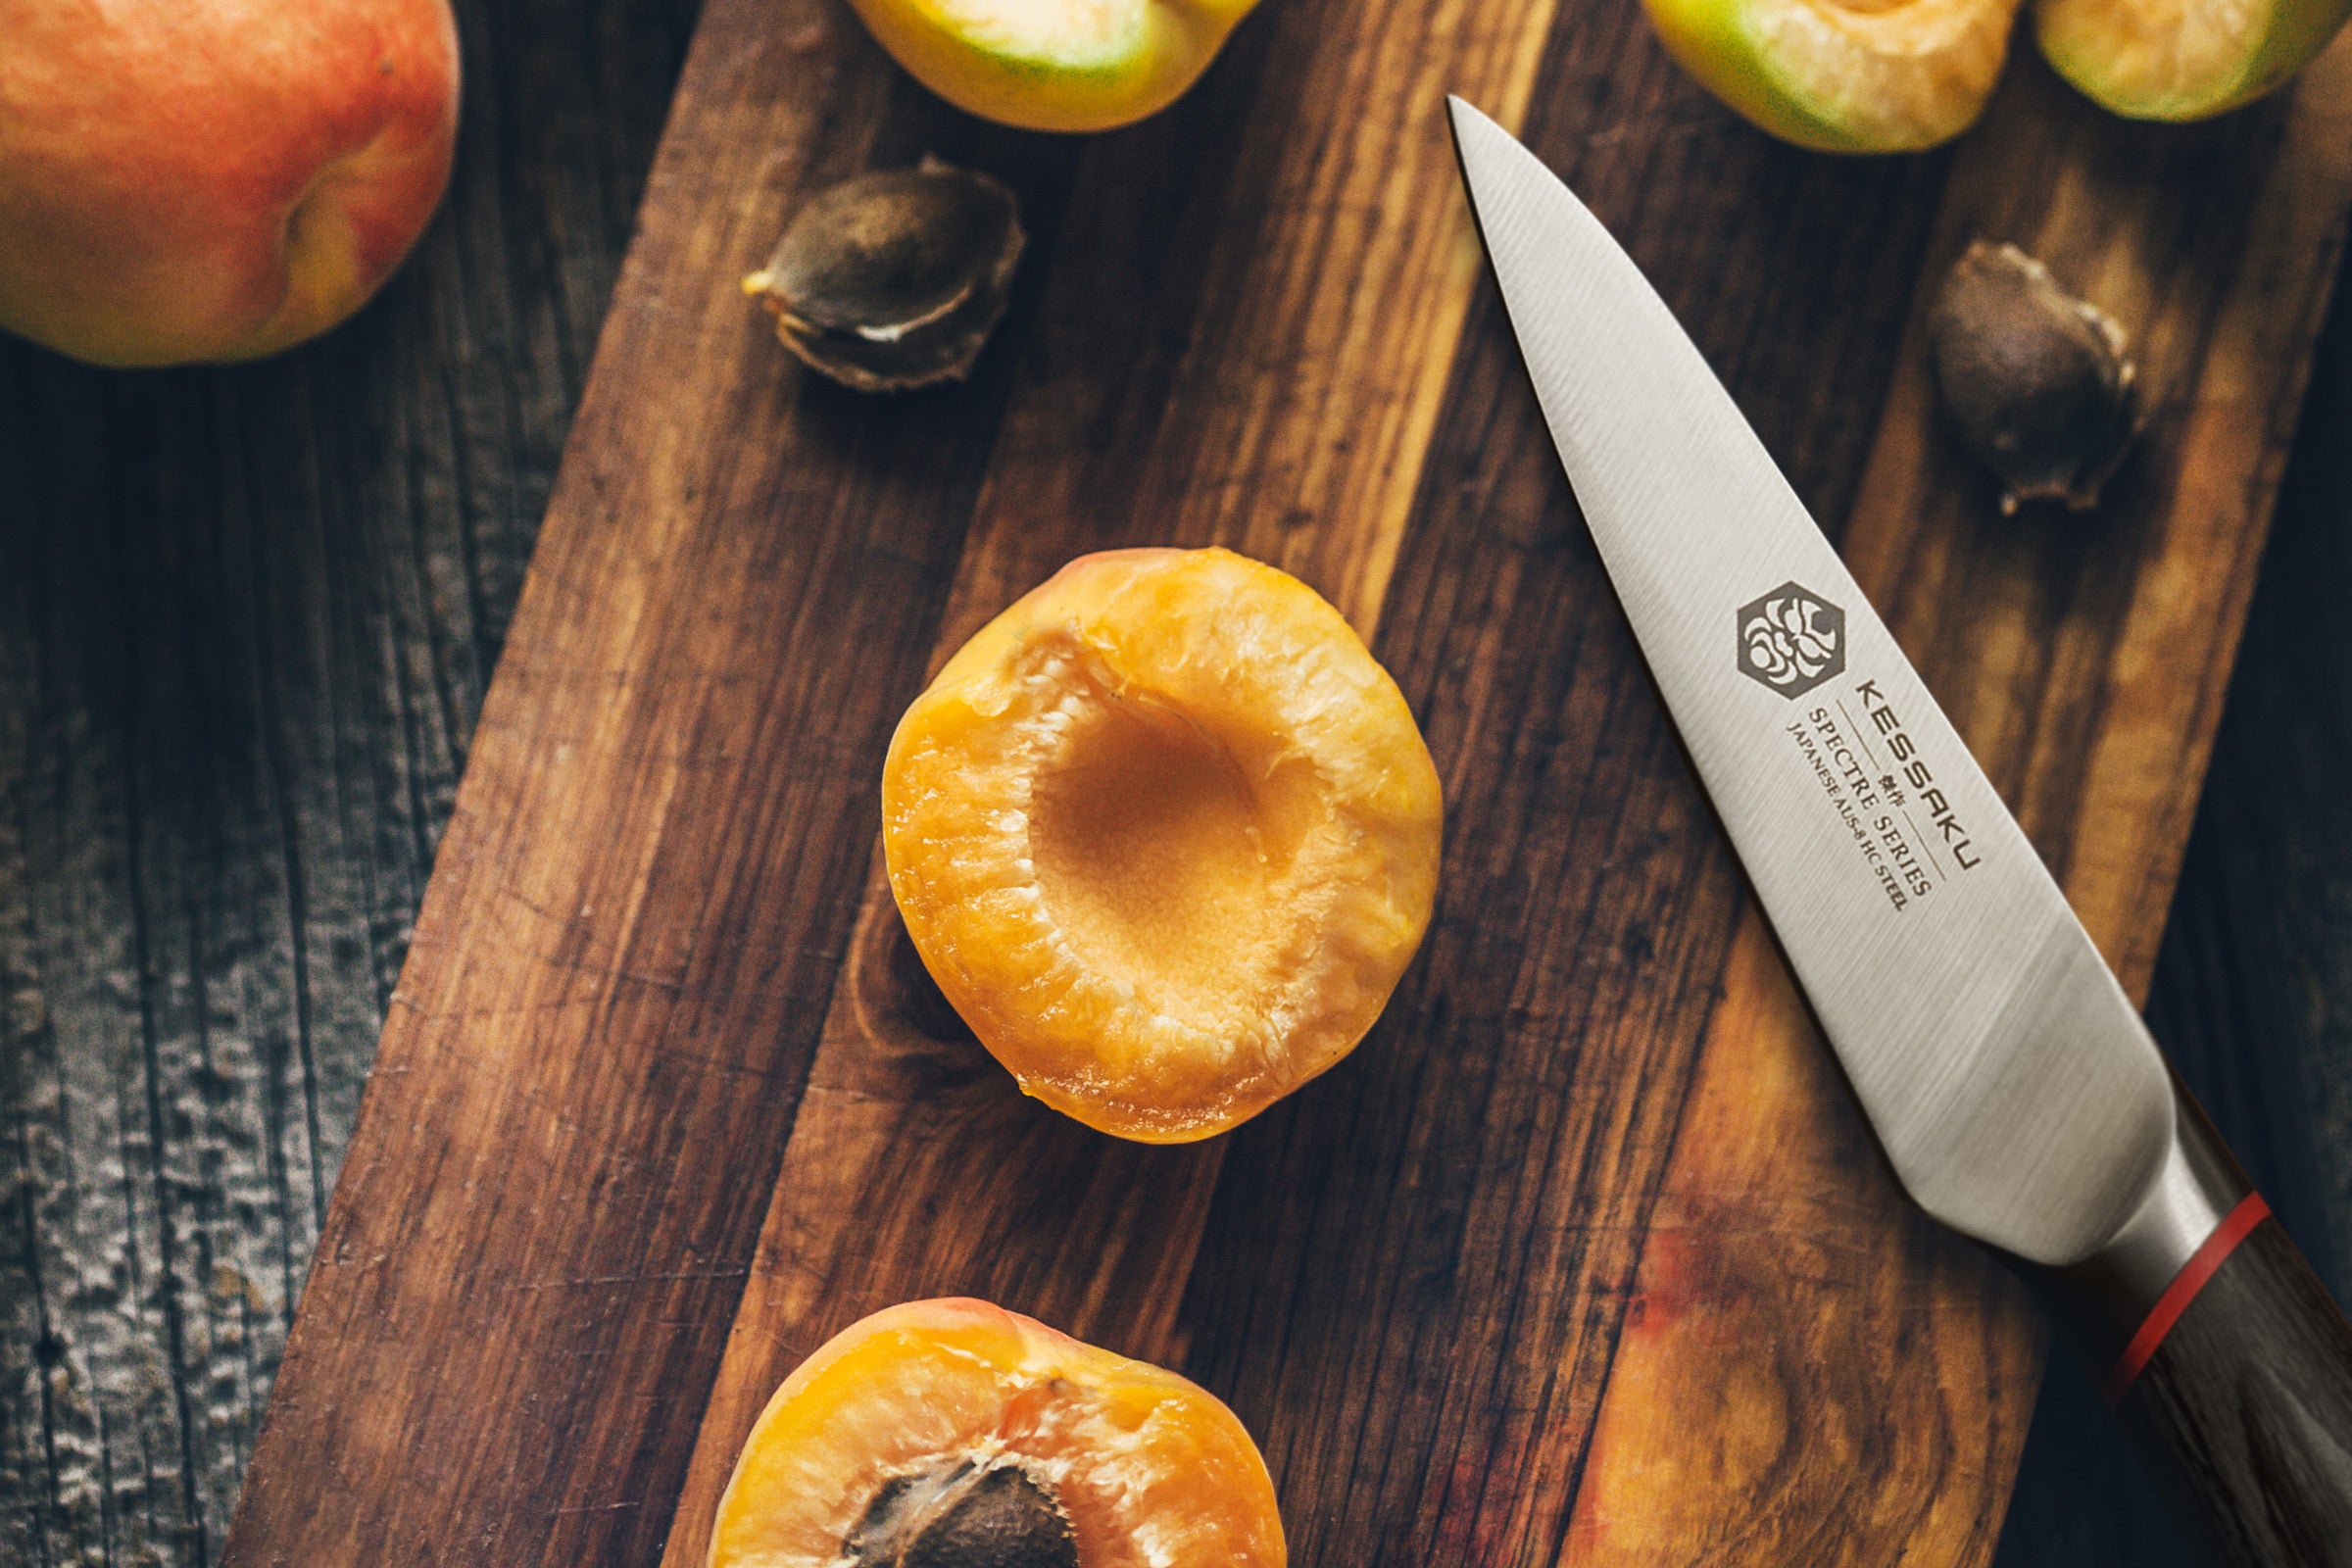 The Spectre Paring Knife after slicing and pitting peaches.